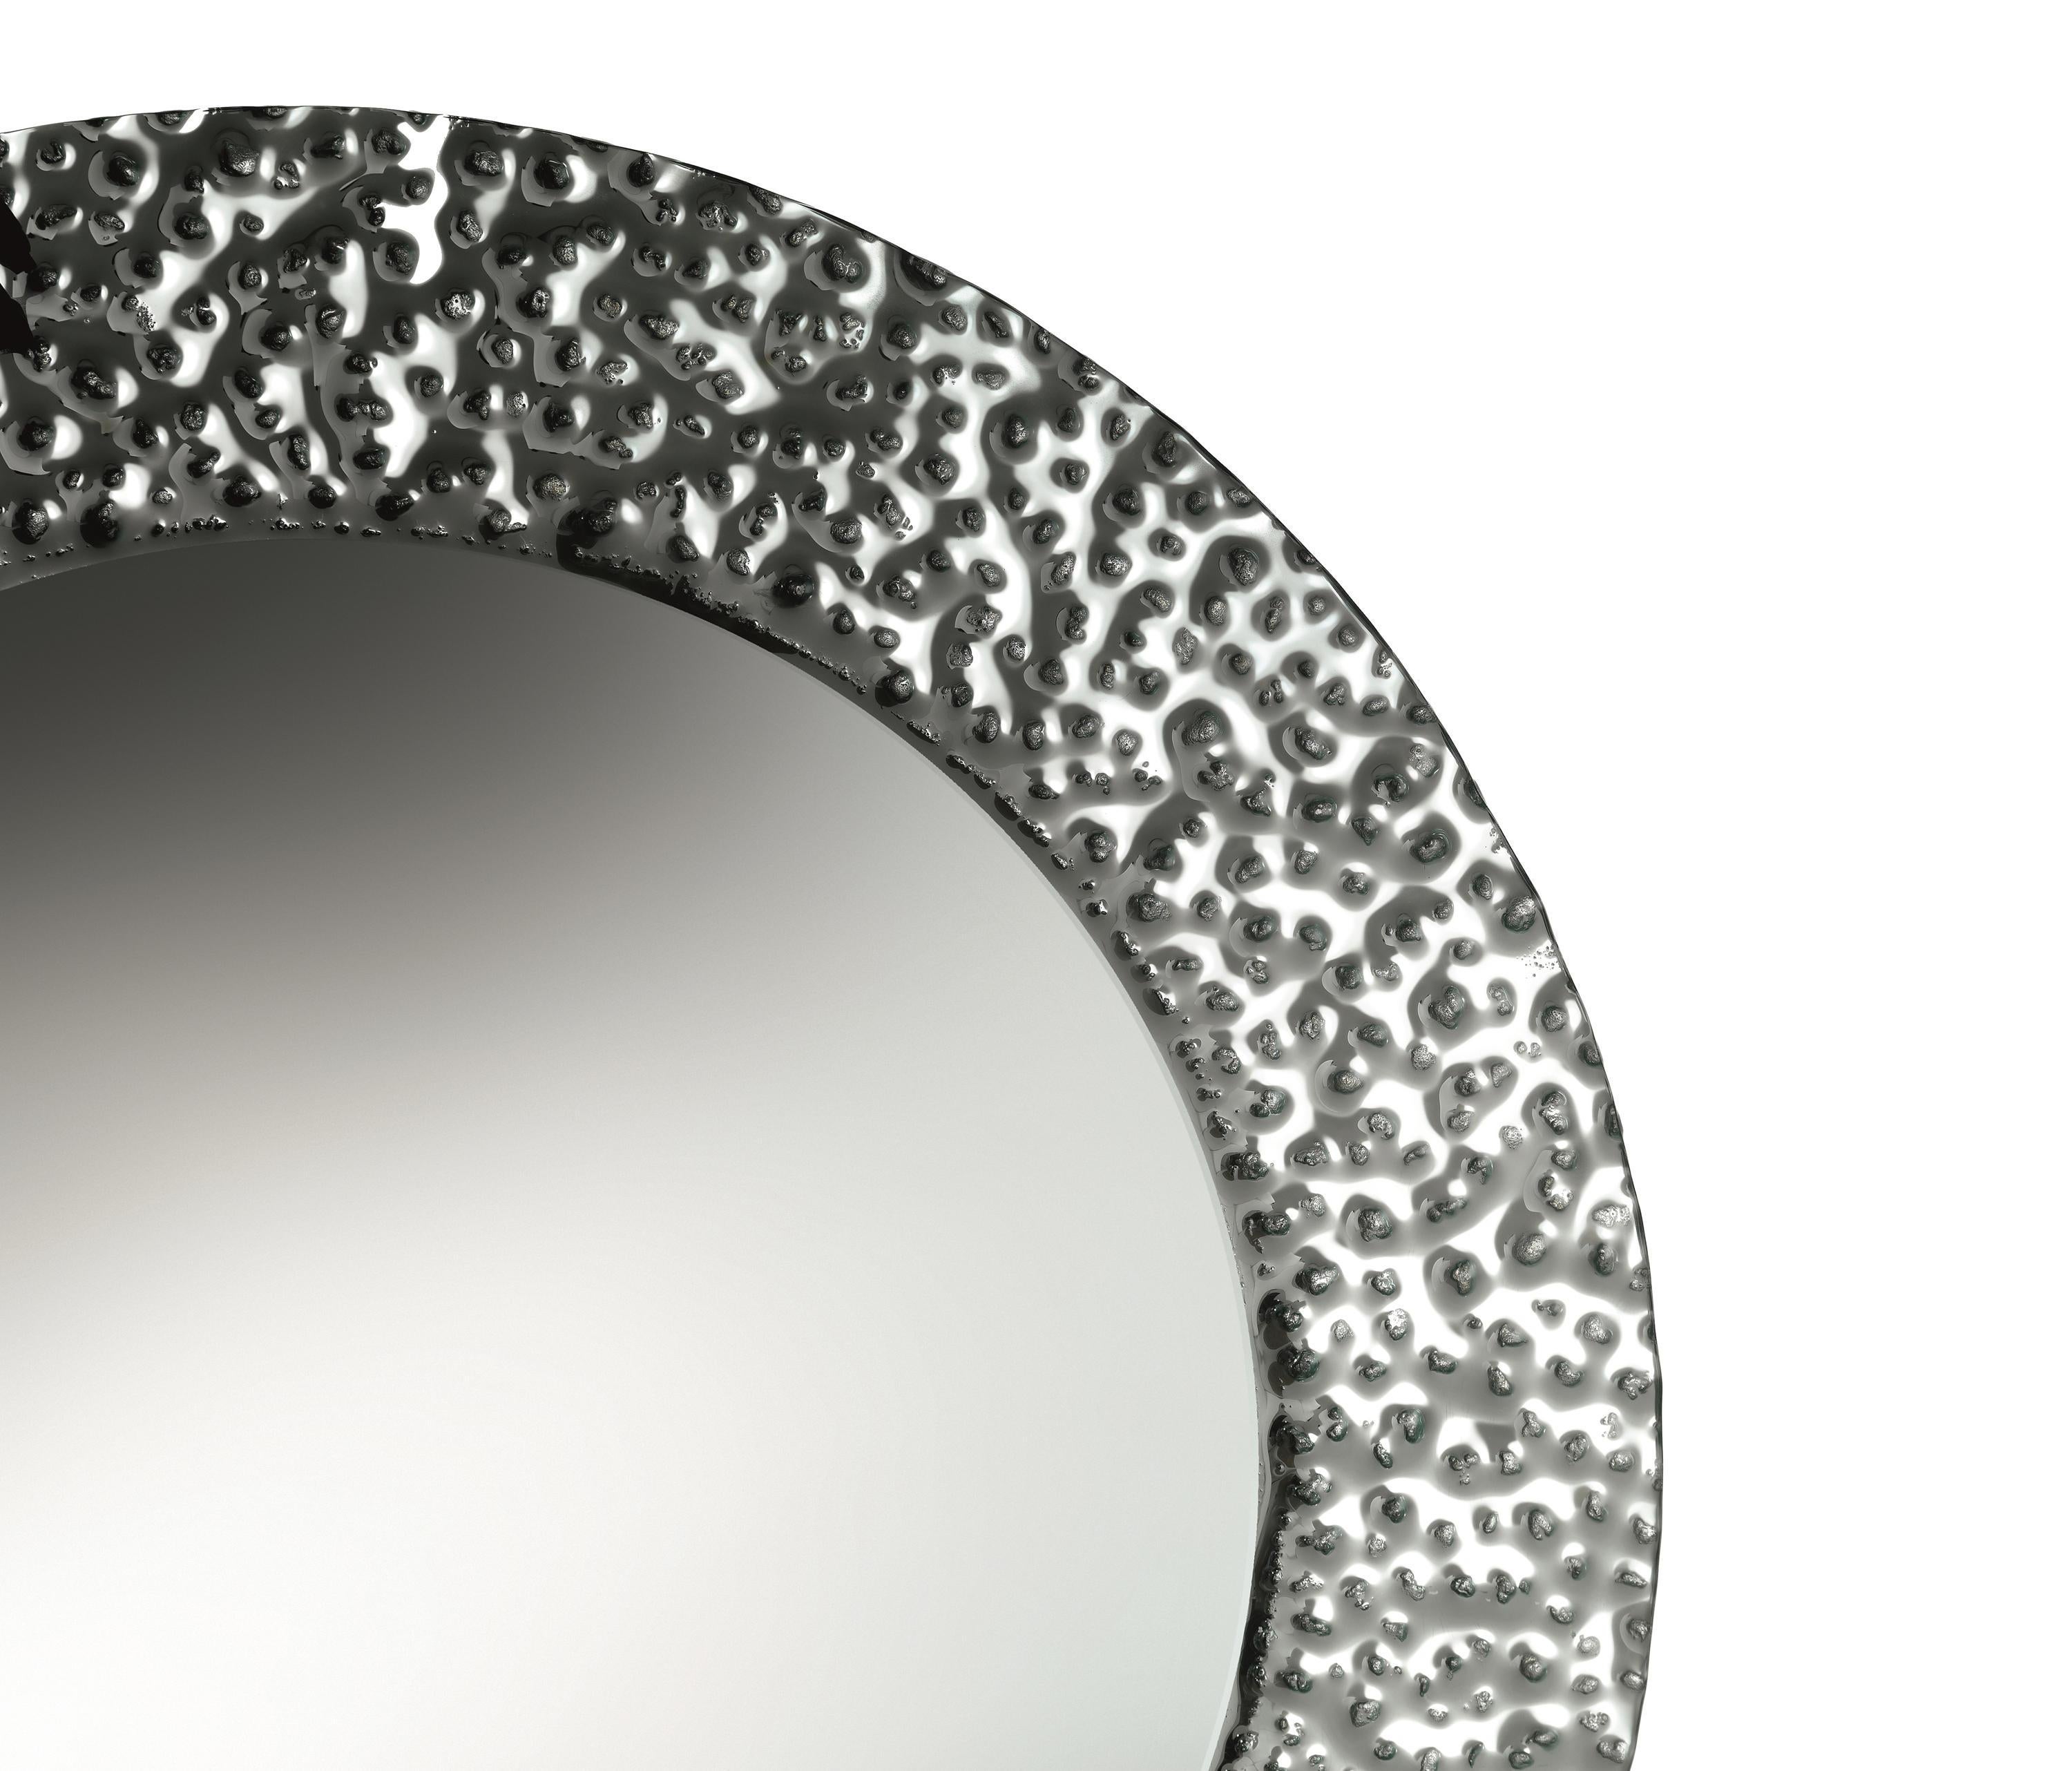 Collection of mirrors in 8 mm-thick high-temperature melted glass, with back-silvered. Artistic relief ornamentation. Flat mirror 5 mm-thick, painted metal rear frame. Horizontal or vertical hanging.